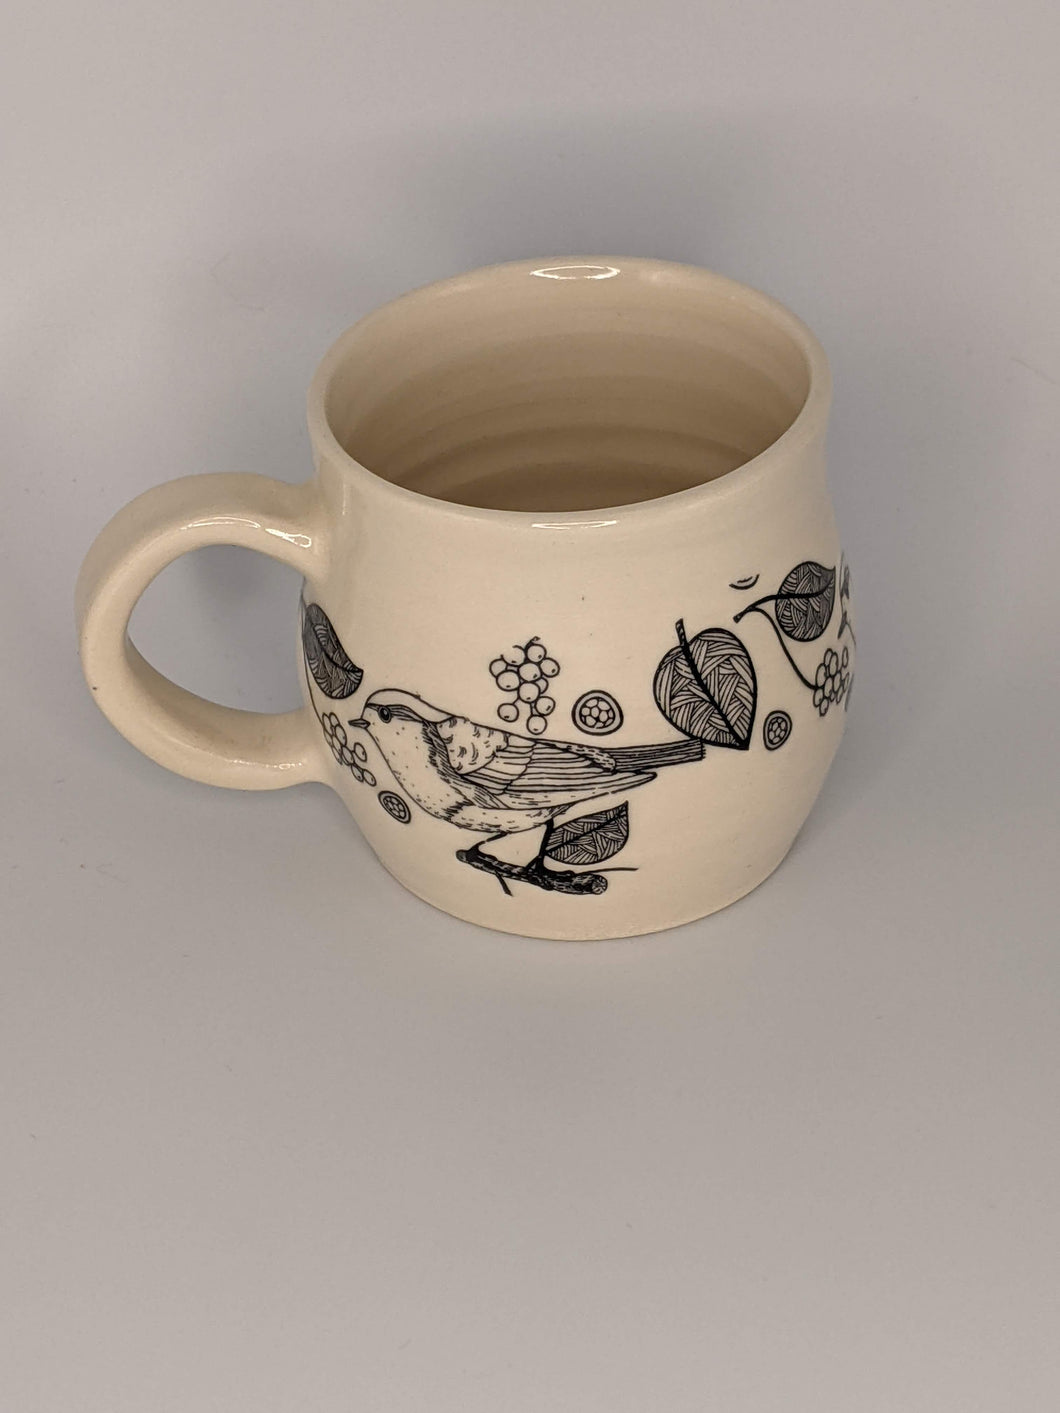 Shelley's Artistry Co. Handcrafted Ceramic Mugs